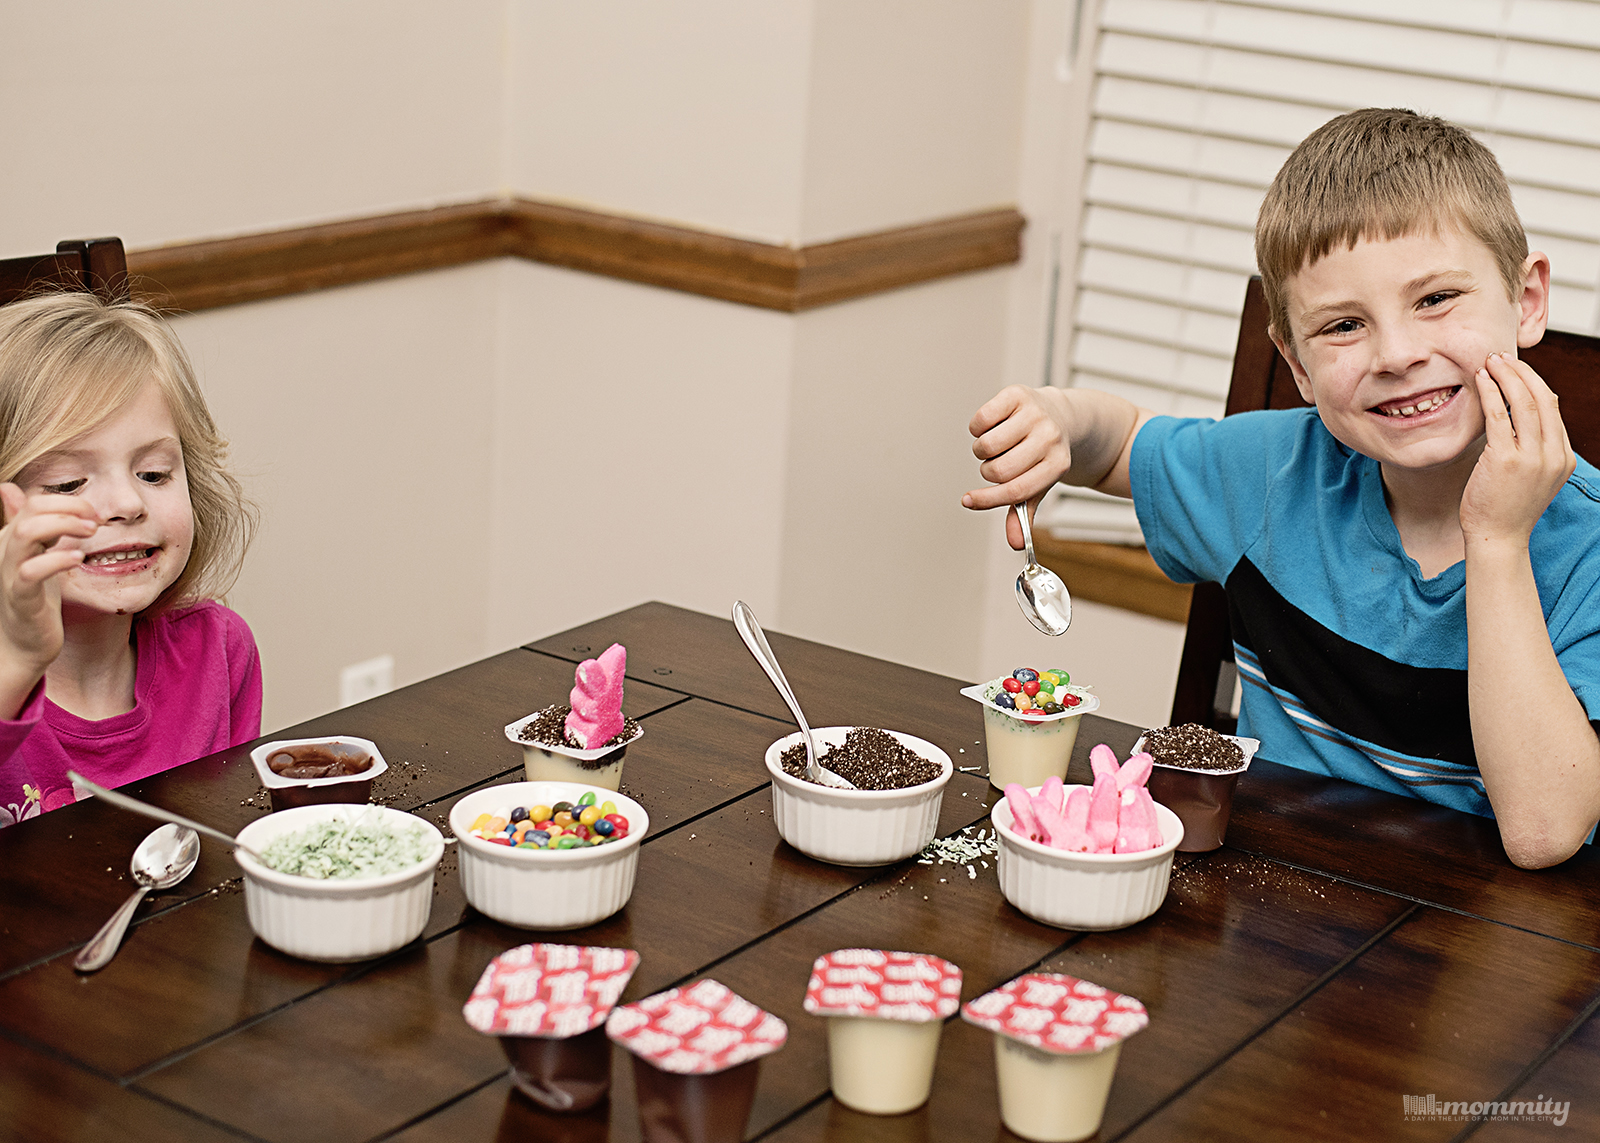 Celebrate Easter with These Fun Snack Pack Pudding Mix-In Ideas!